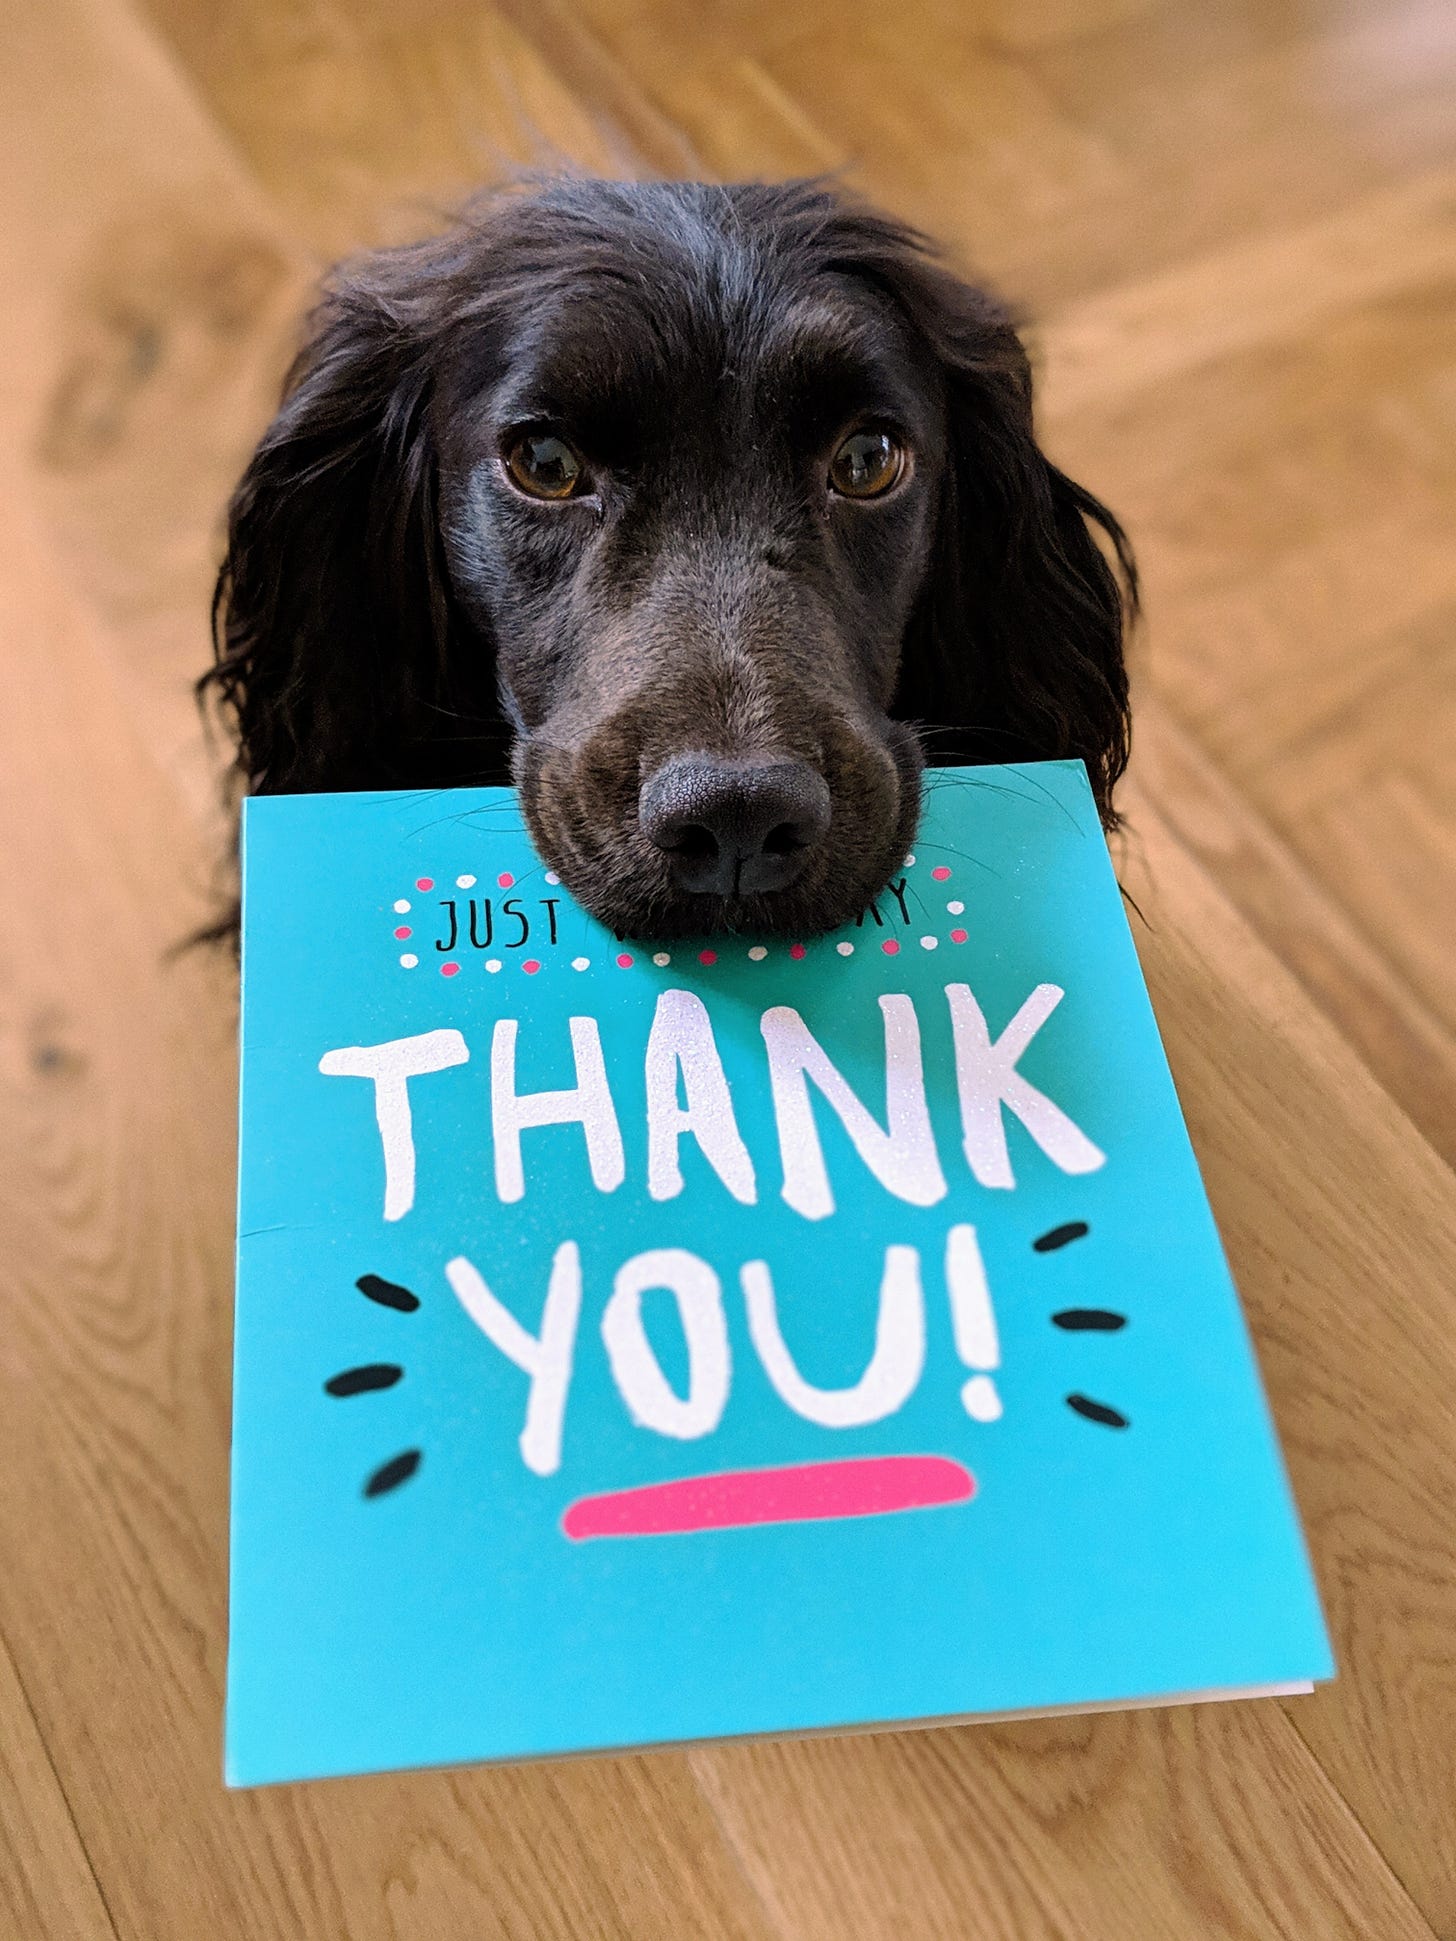 Dog holding thank you note